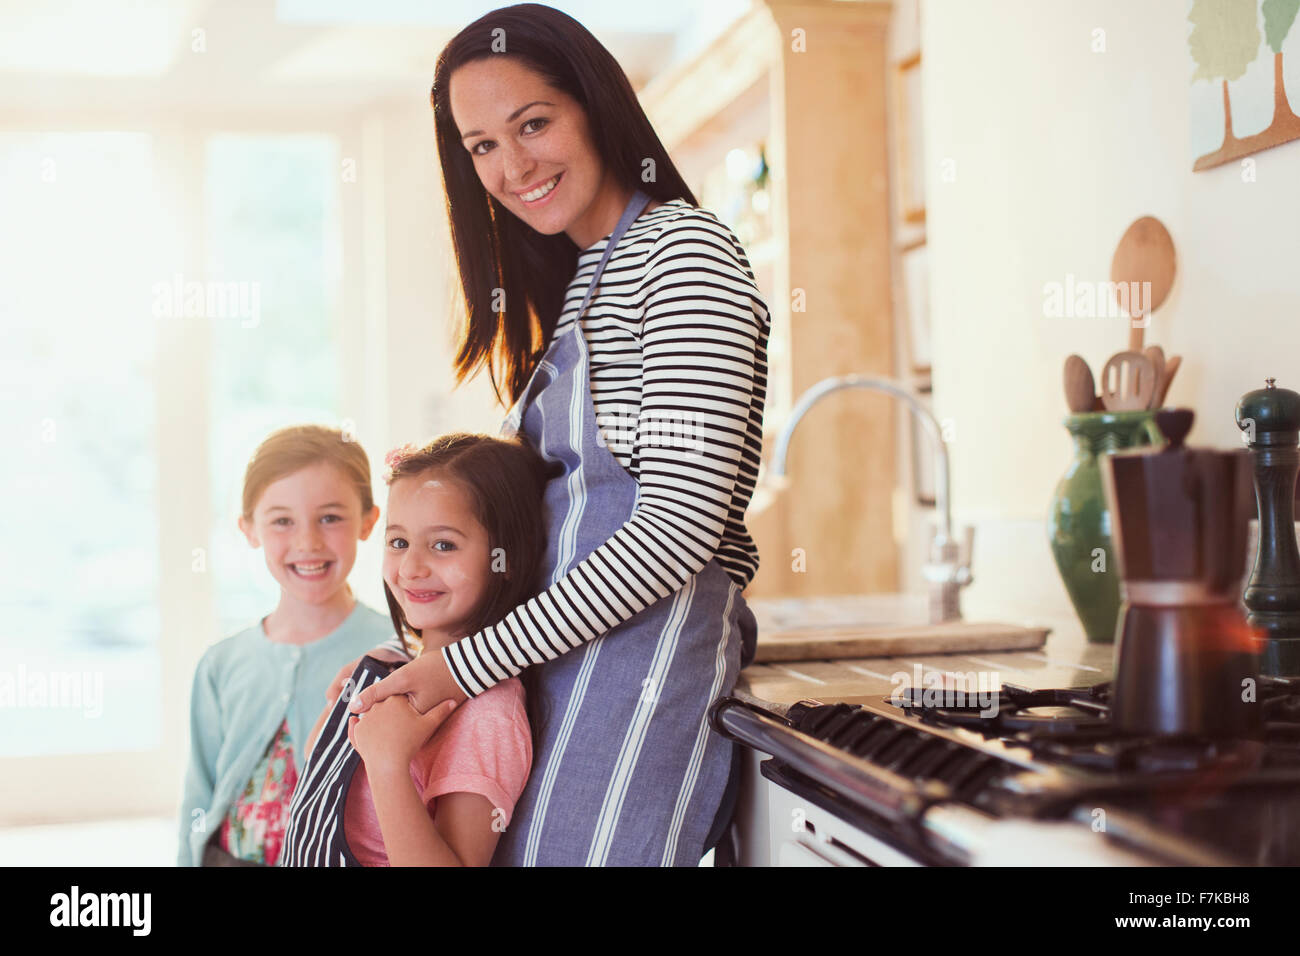 Portrait smiling mother and daughters in kitchen Banque D'Images